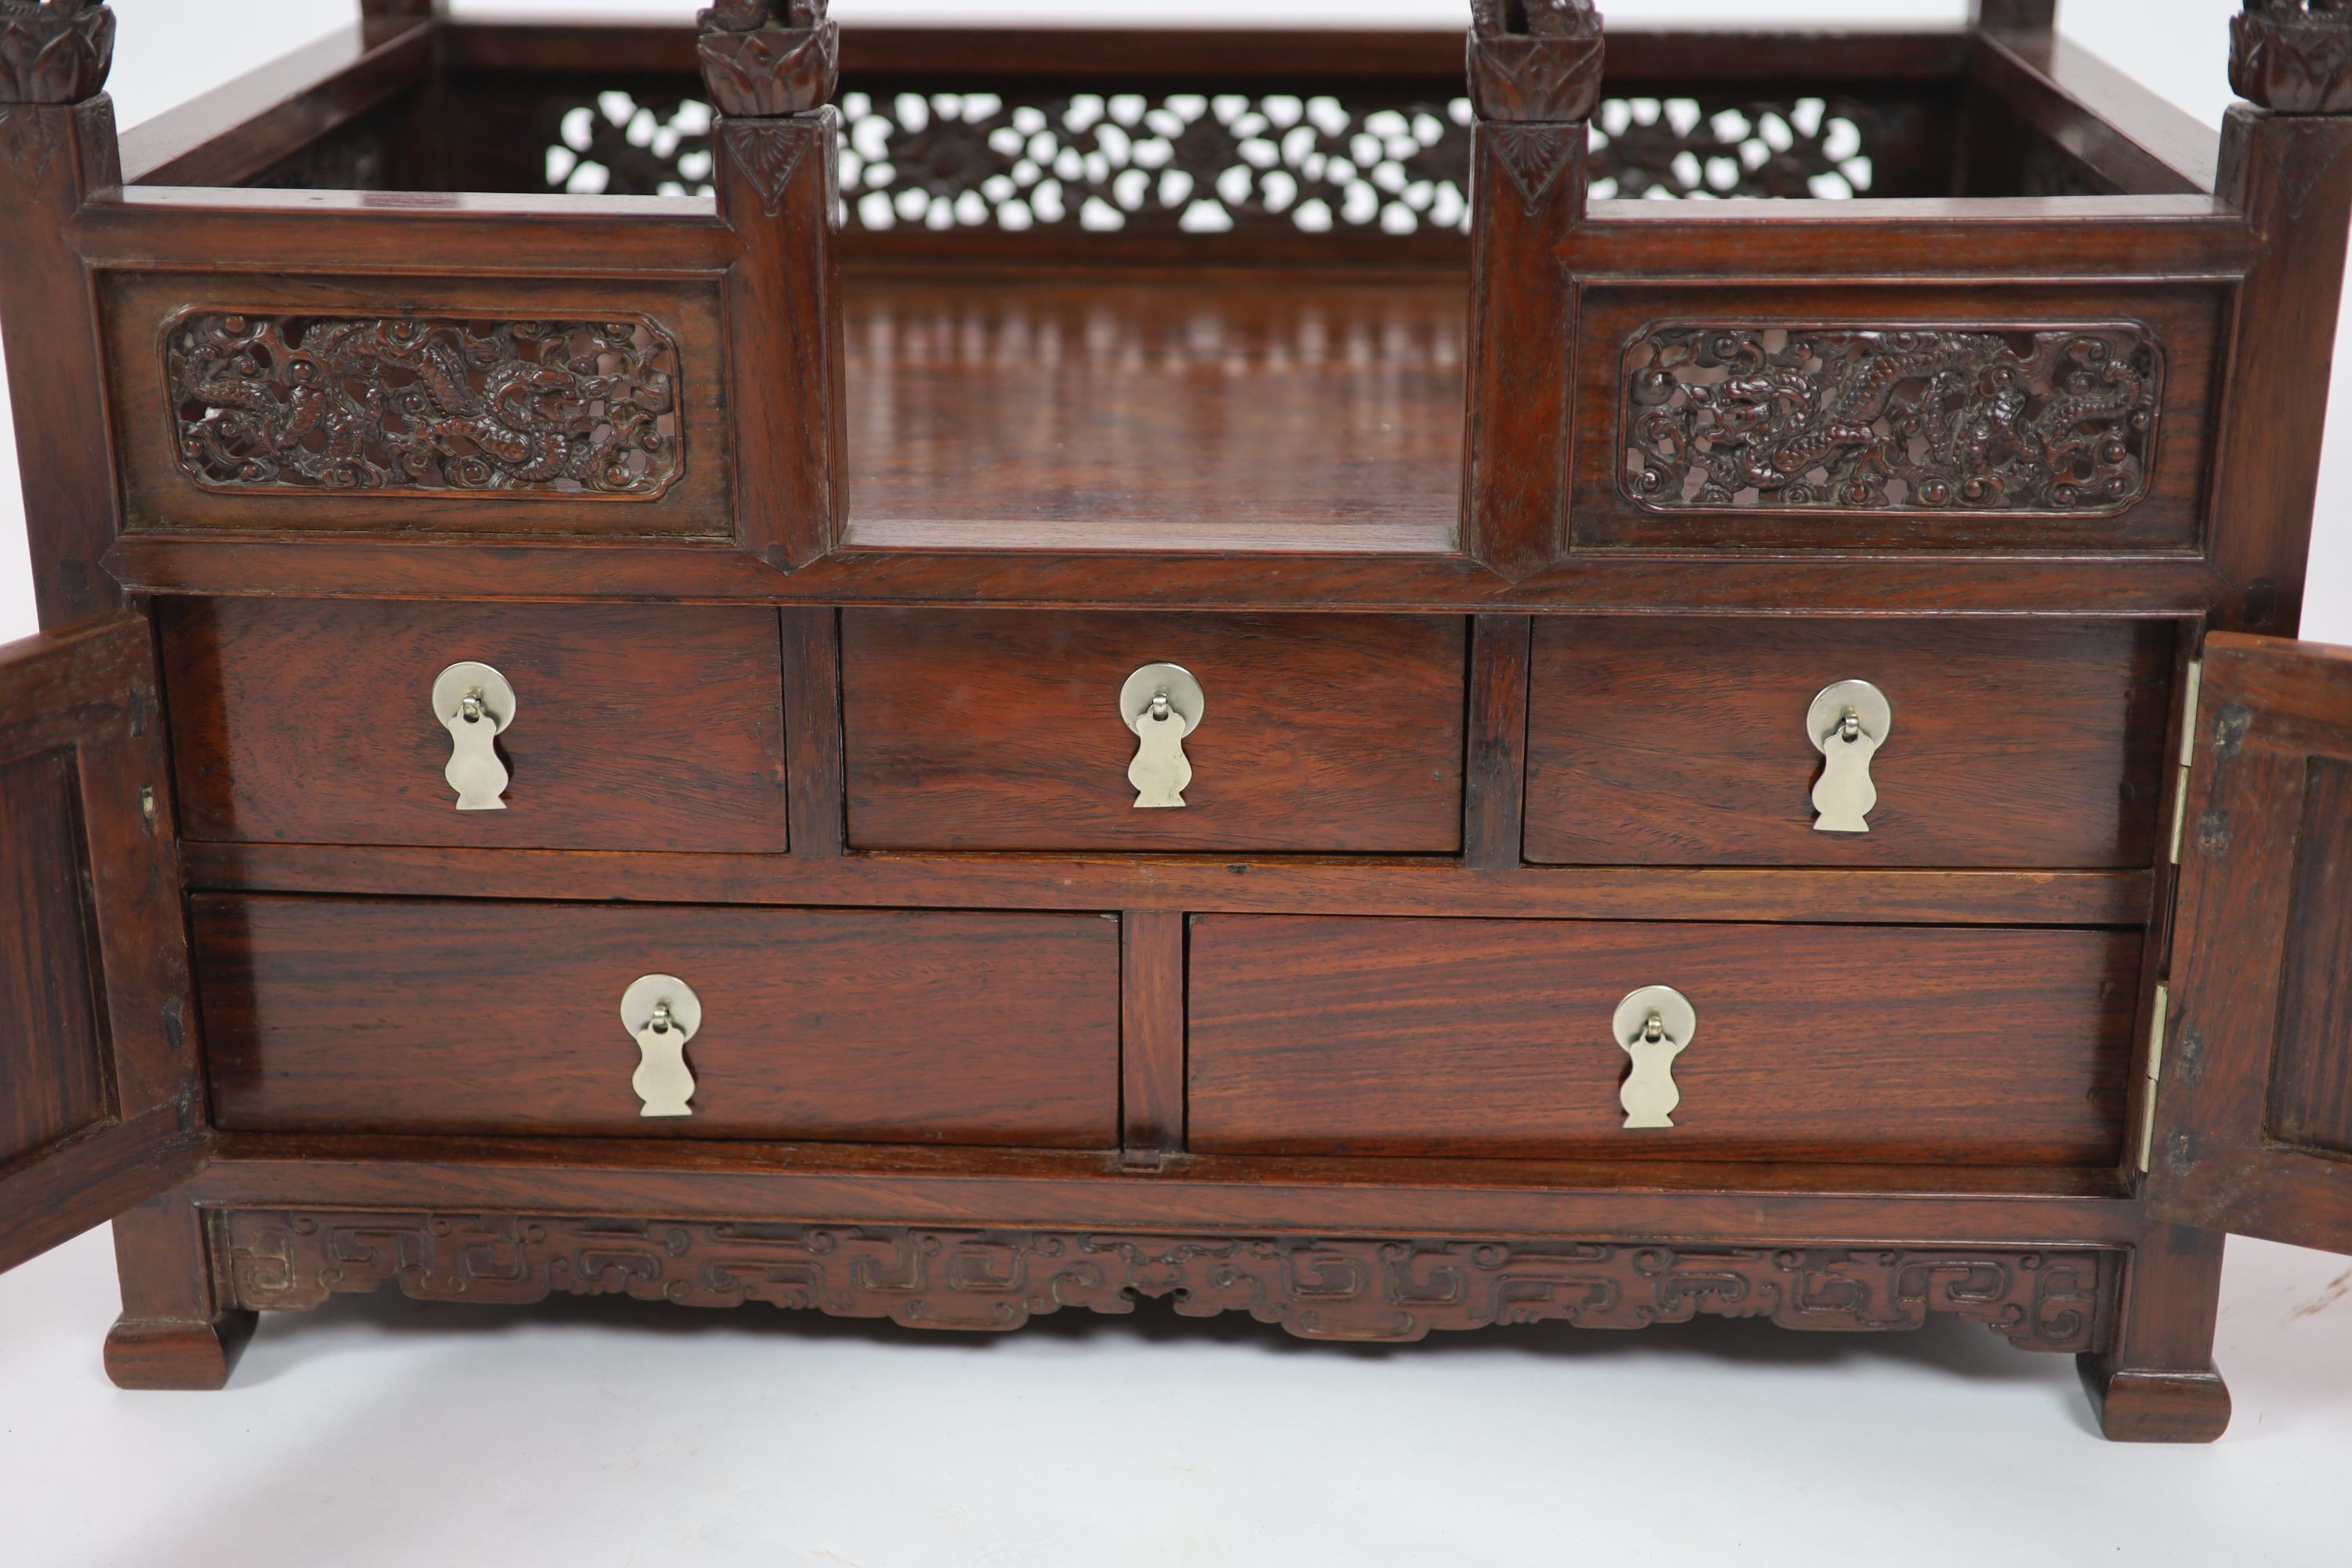 A good Chinese huanghuali table cabinet, 18th/19th century, 59.5cm wide, 42.5cm high, 37.5cm deep